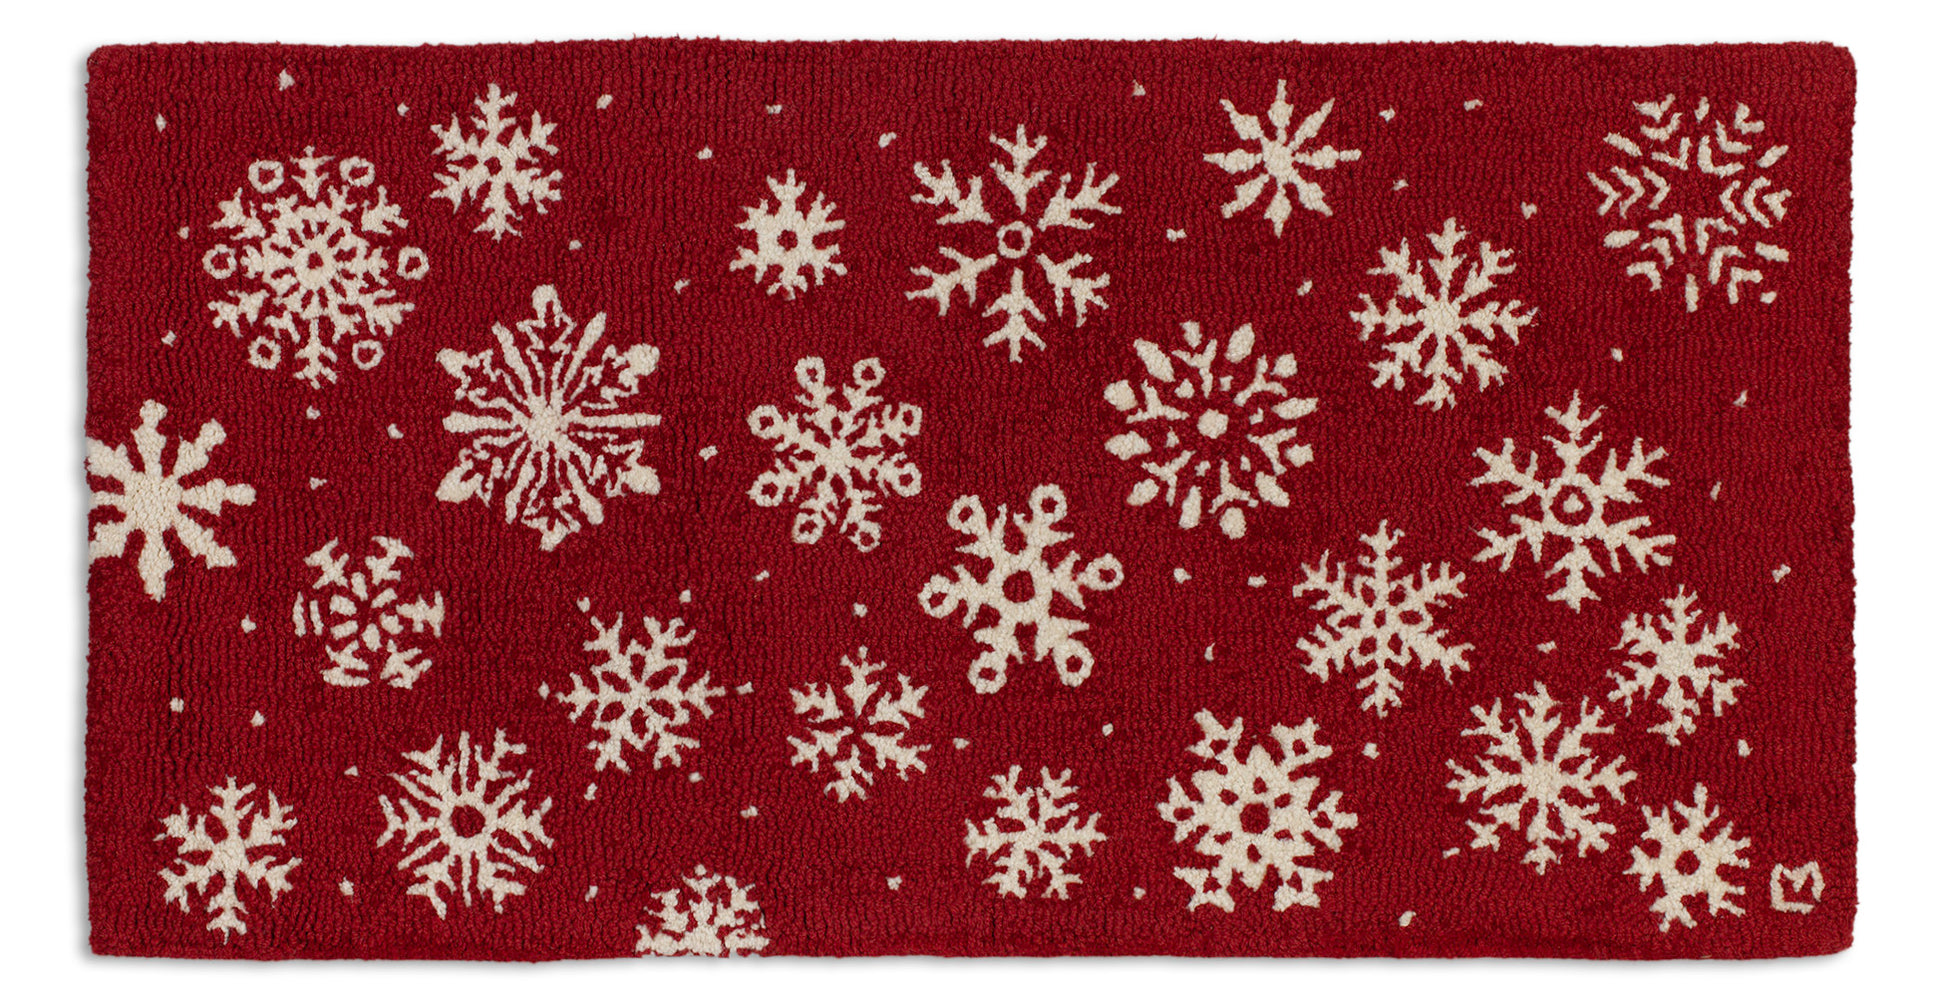 Frosty Flakes On Red-2x4 Rug-Nautical Decor and Gifts